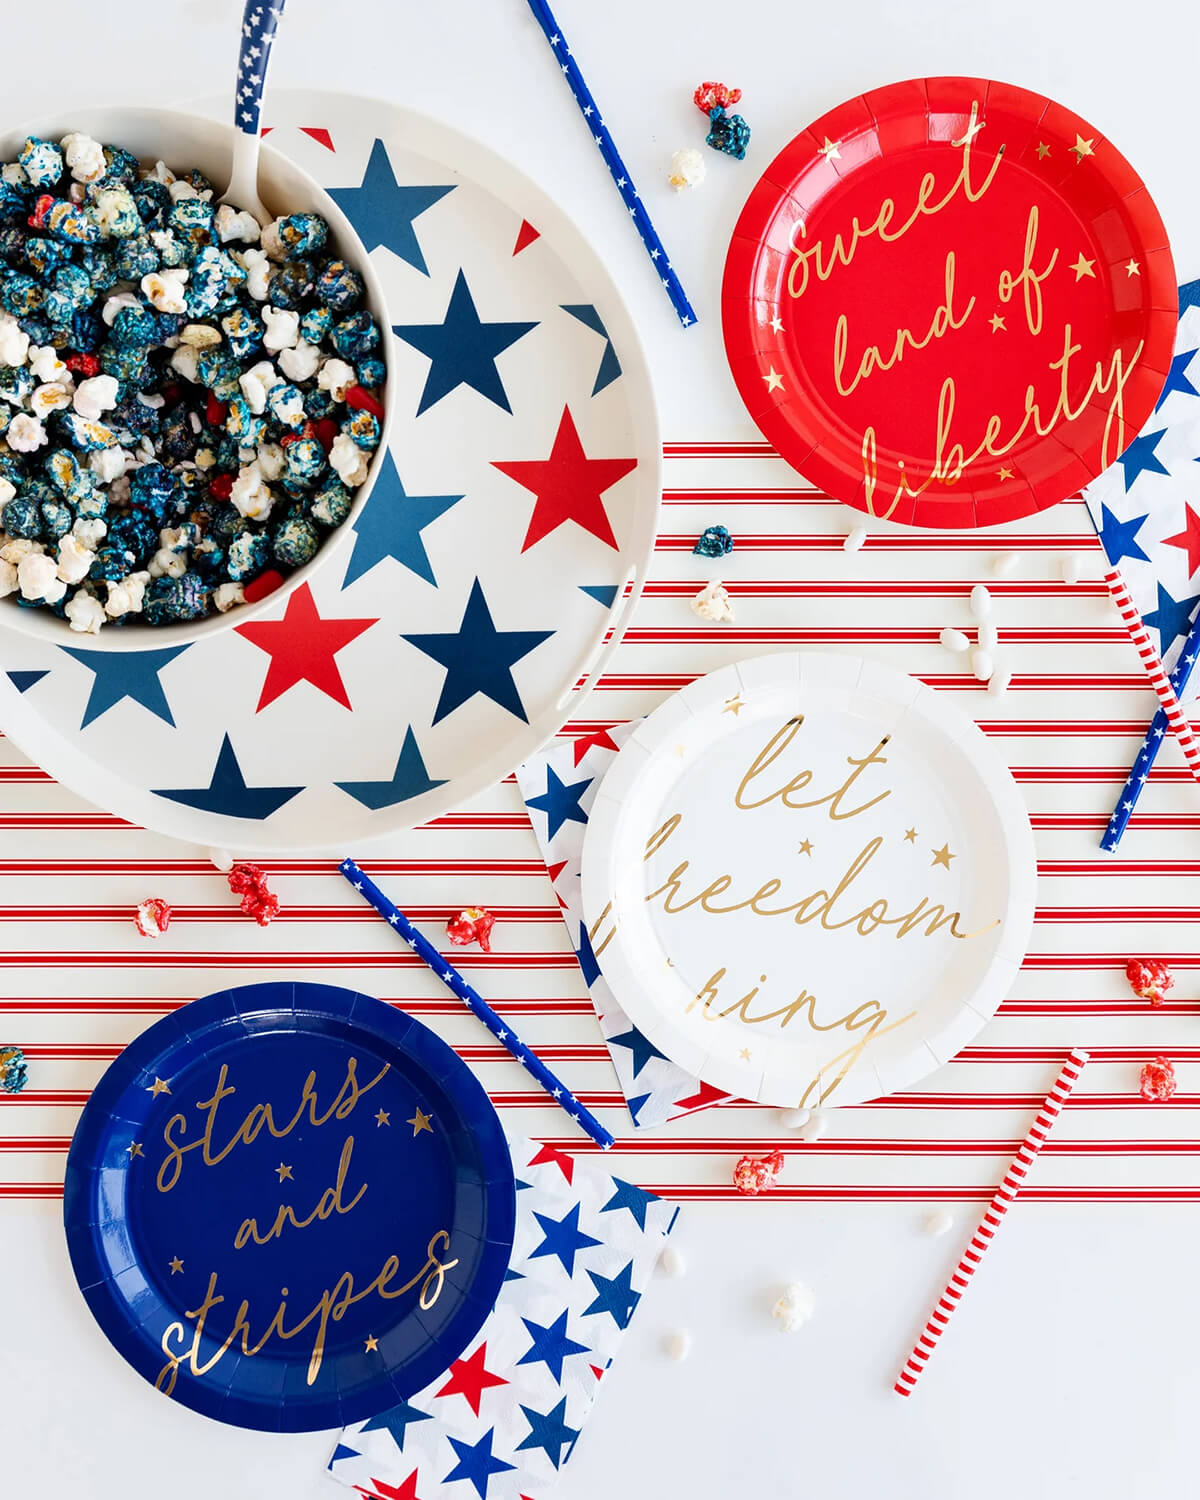 https://www.bubblegummarket.com/cdn/shop/files/americana-script-red-white-blue-paper-plate-set-sweet-land-of-liberty-stars-and-stripes-let-freedom-ring-july-4th-memorial-day-party-styled.jpg?v=1683474373